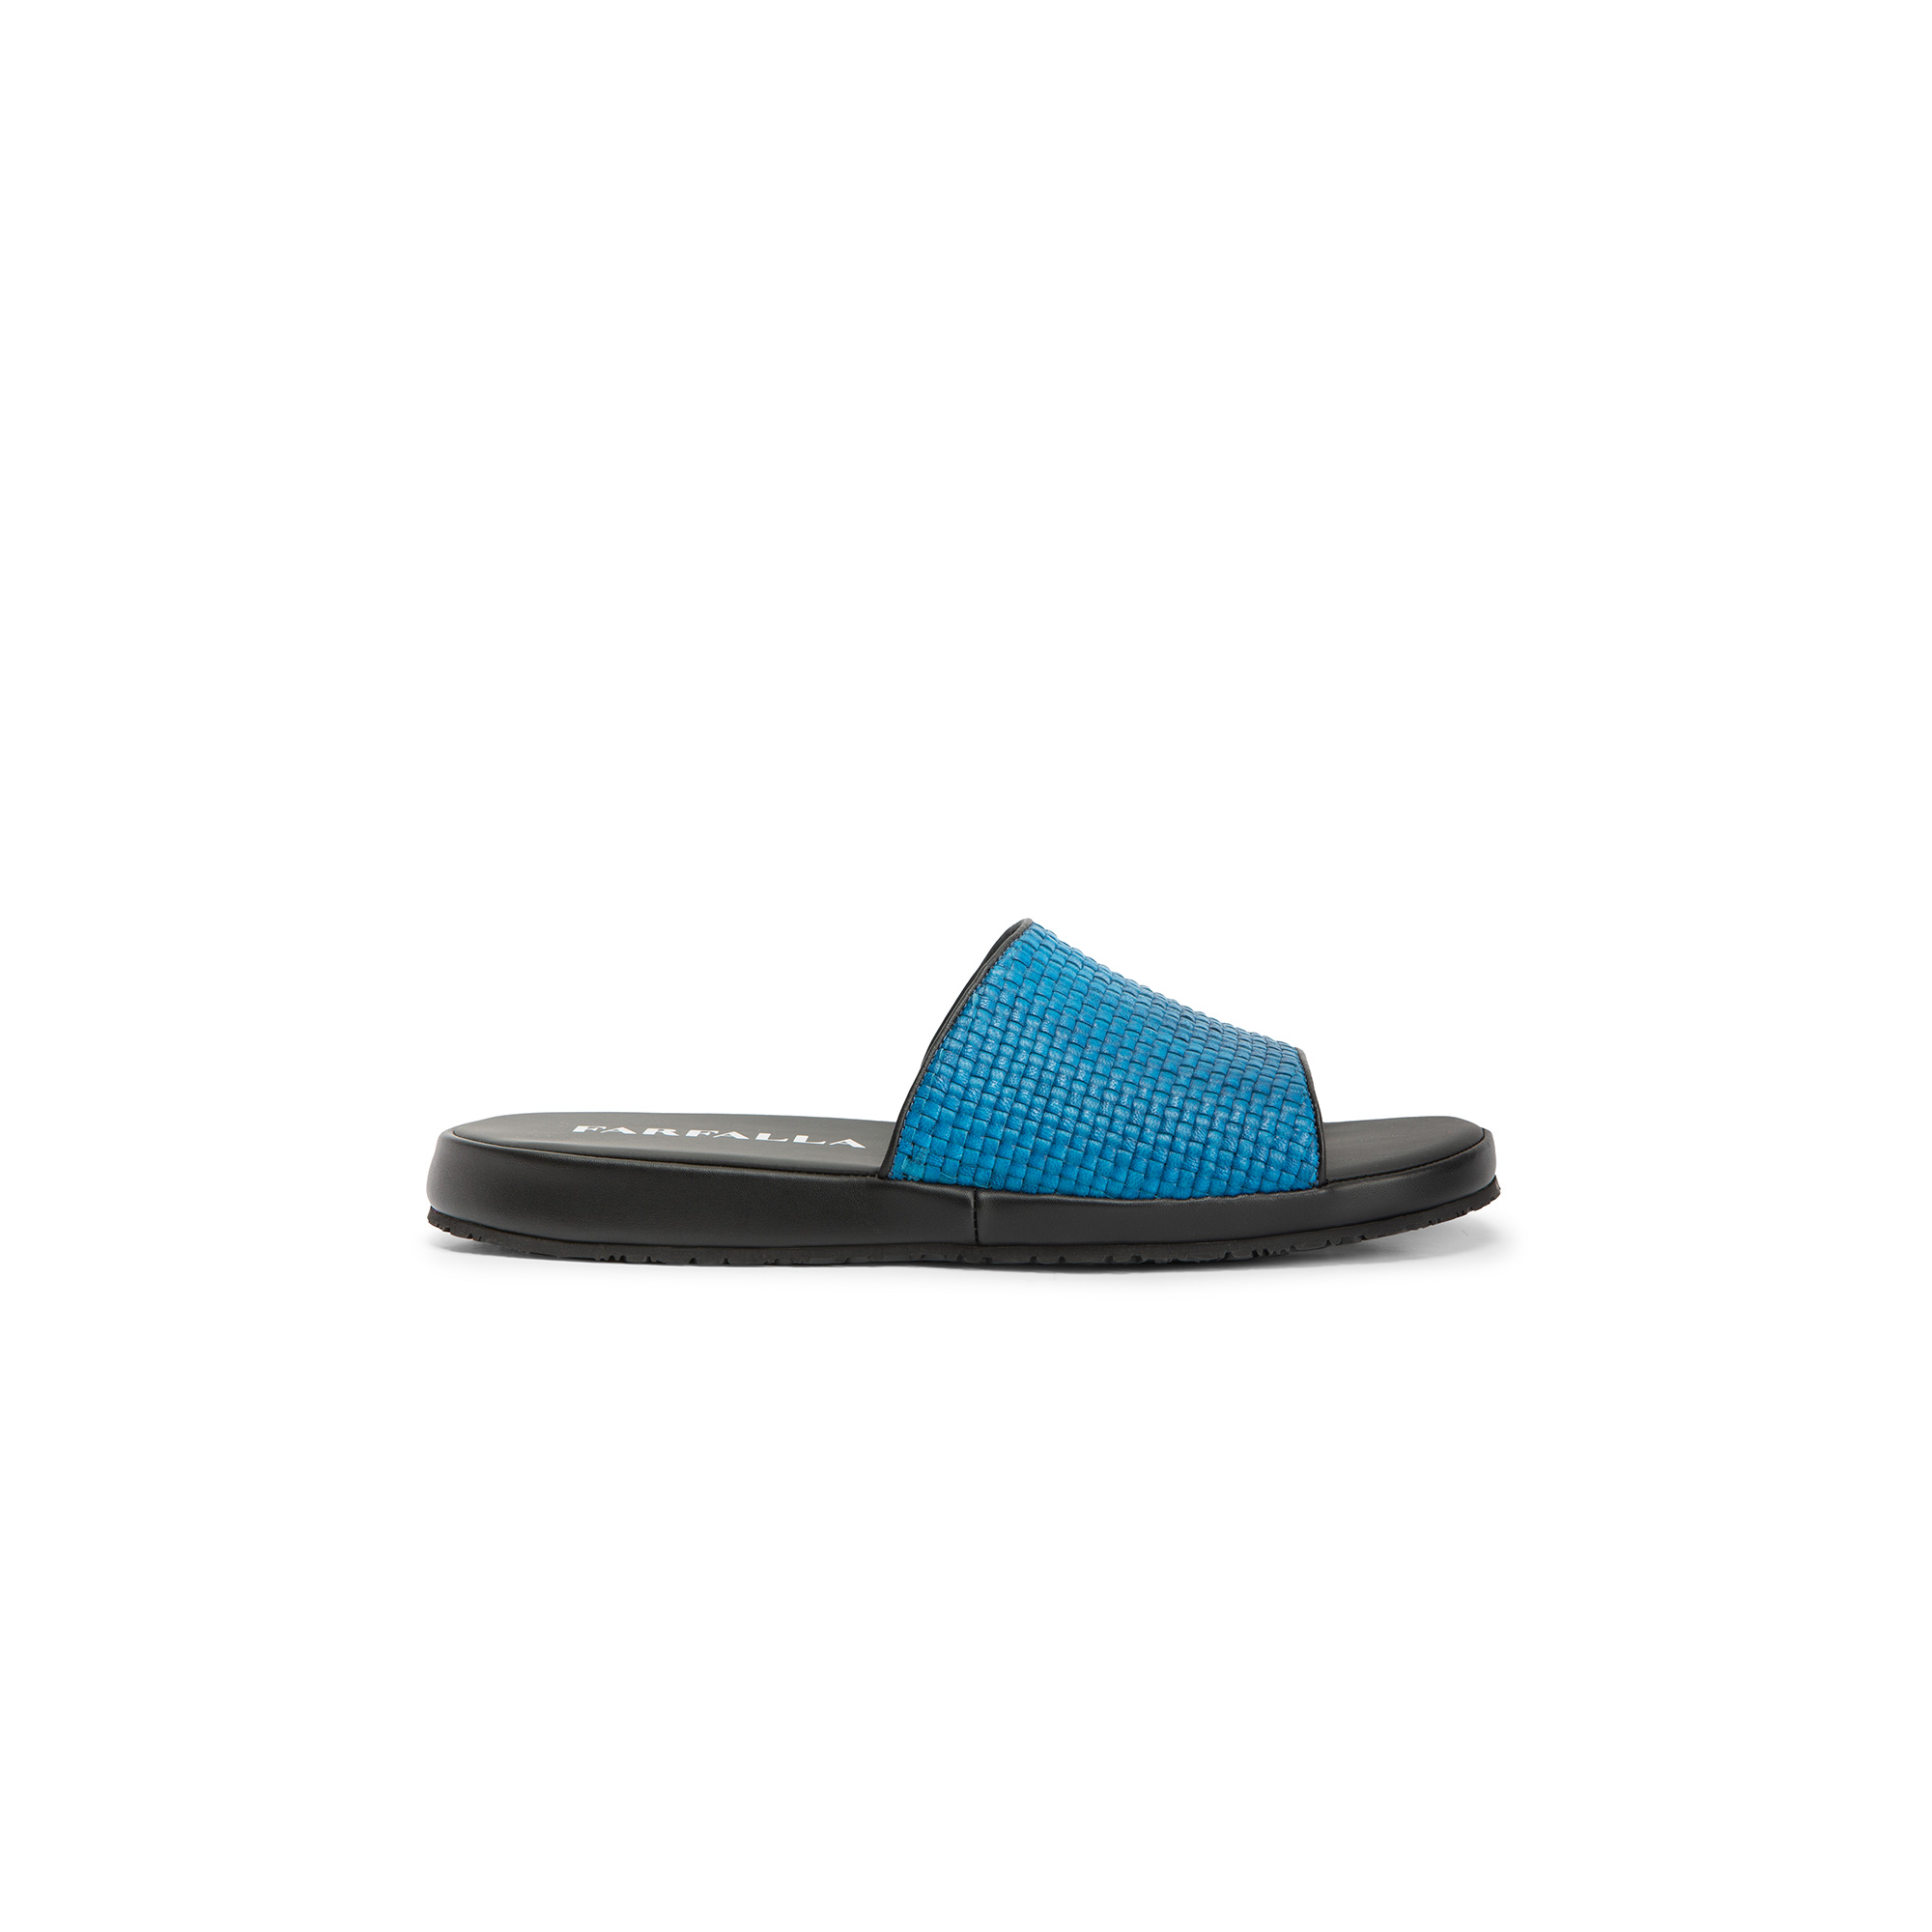 Outside light blue and black woven leather and calf leather sandal - Farfalla italian slippers